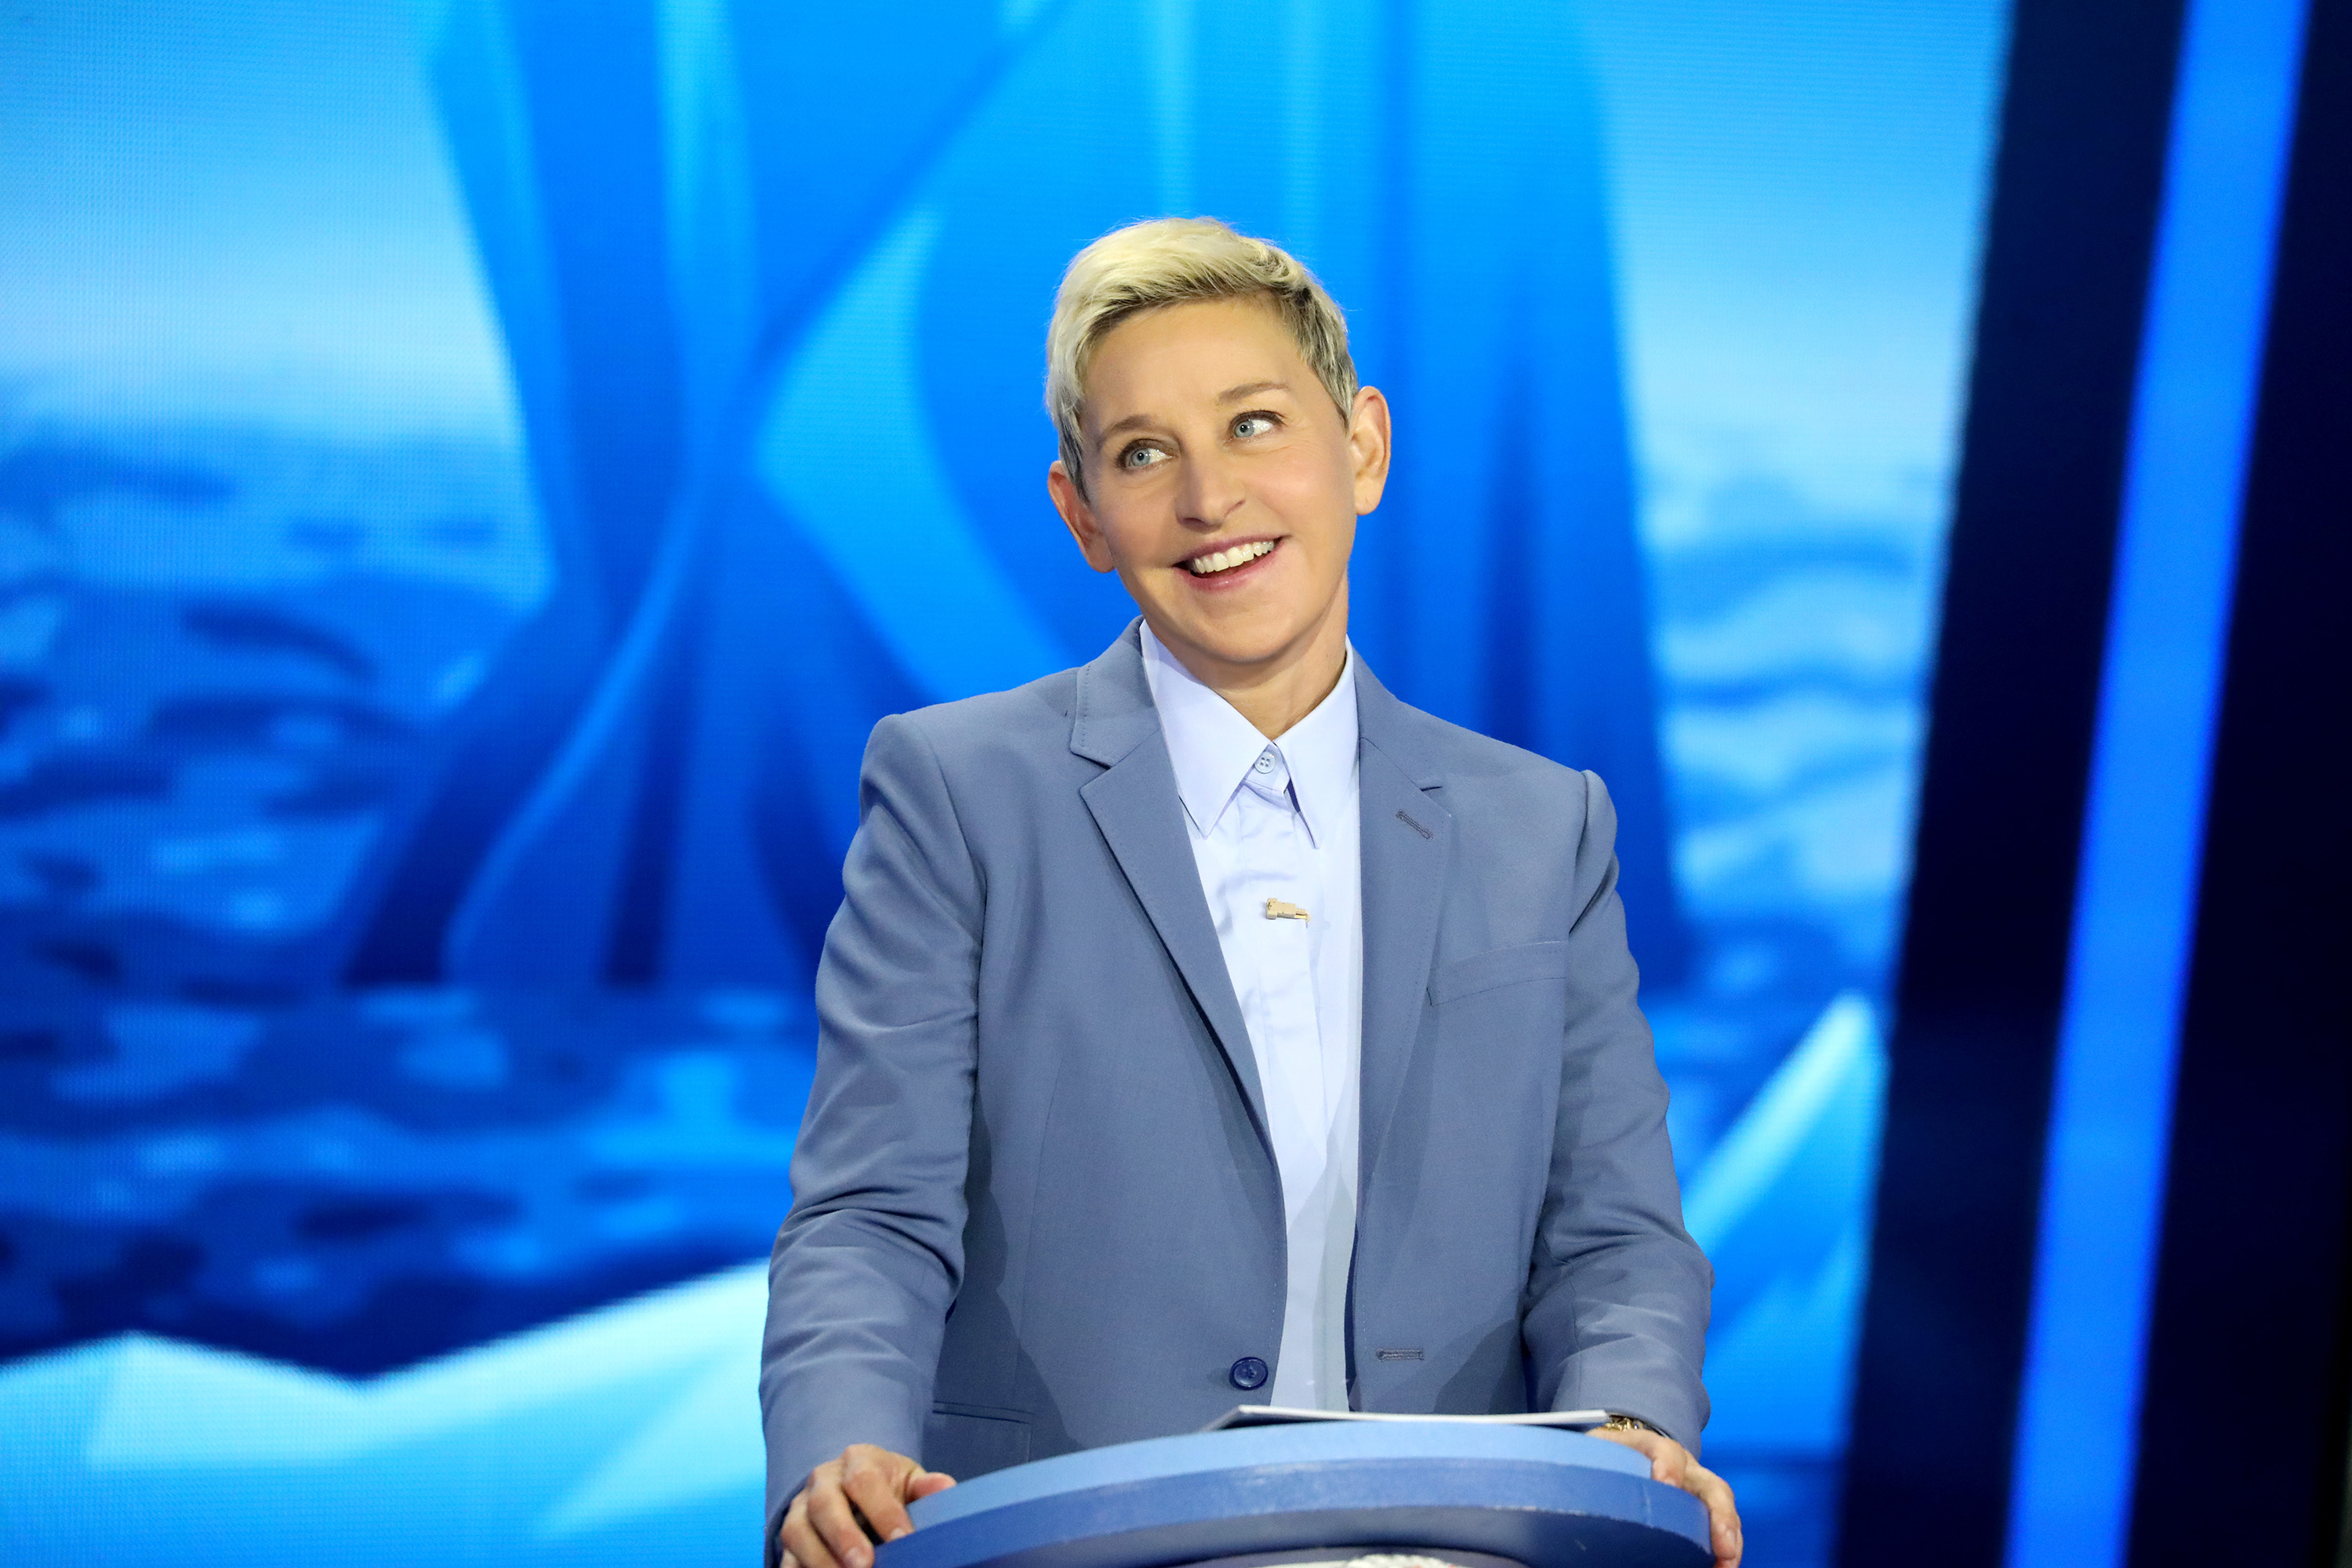 Ellen DeGeneres on a TV set, smiling, in a blue suit and white shirt, standing behind a podium